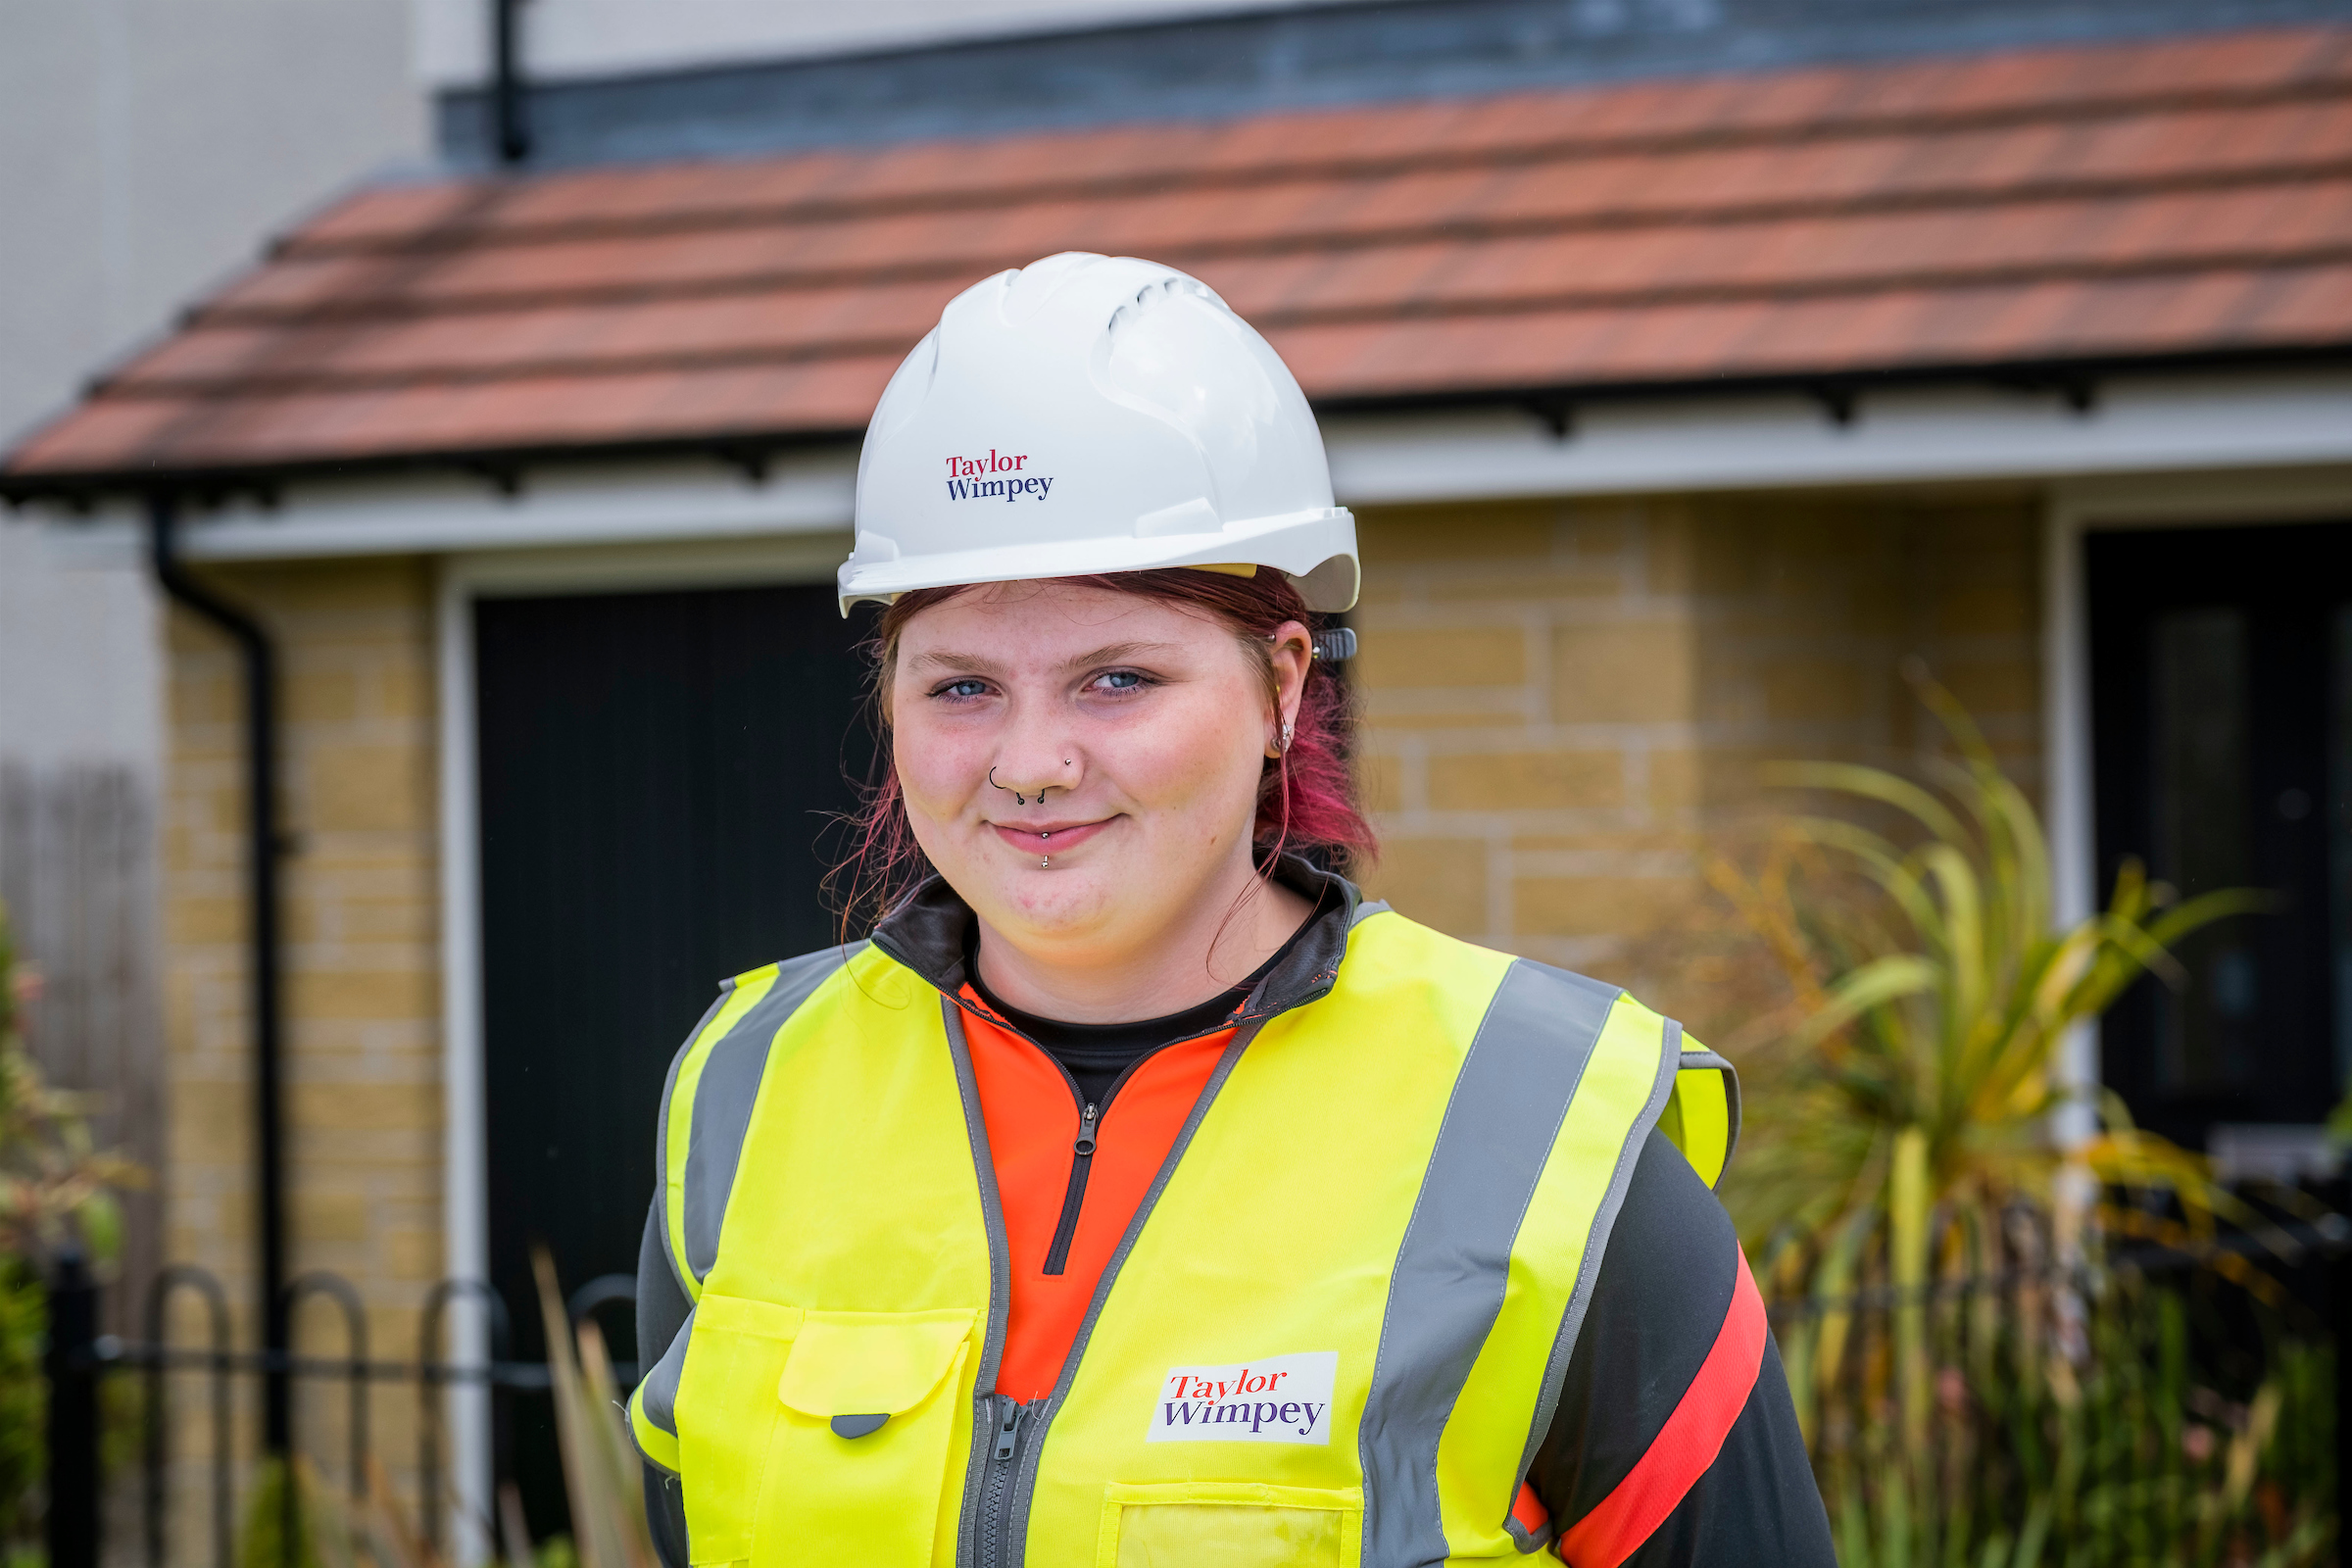 Young Taylor Wimpey apprentice shows off skills in national competition